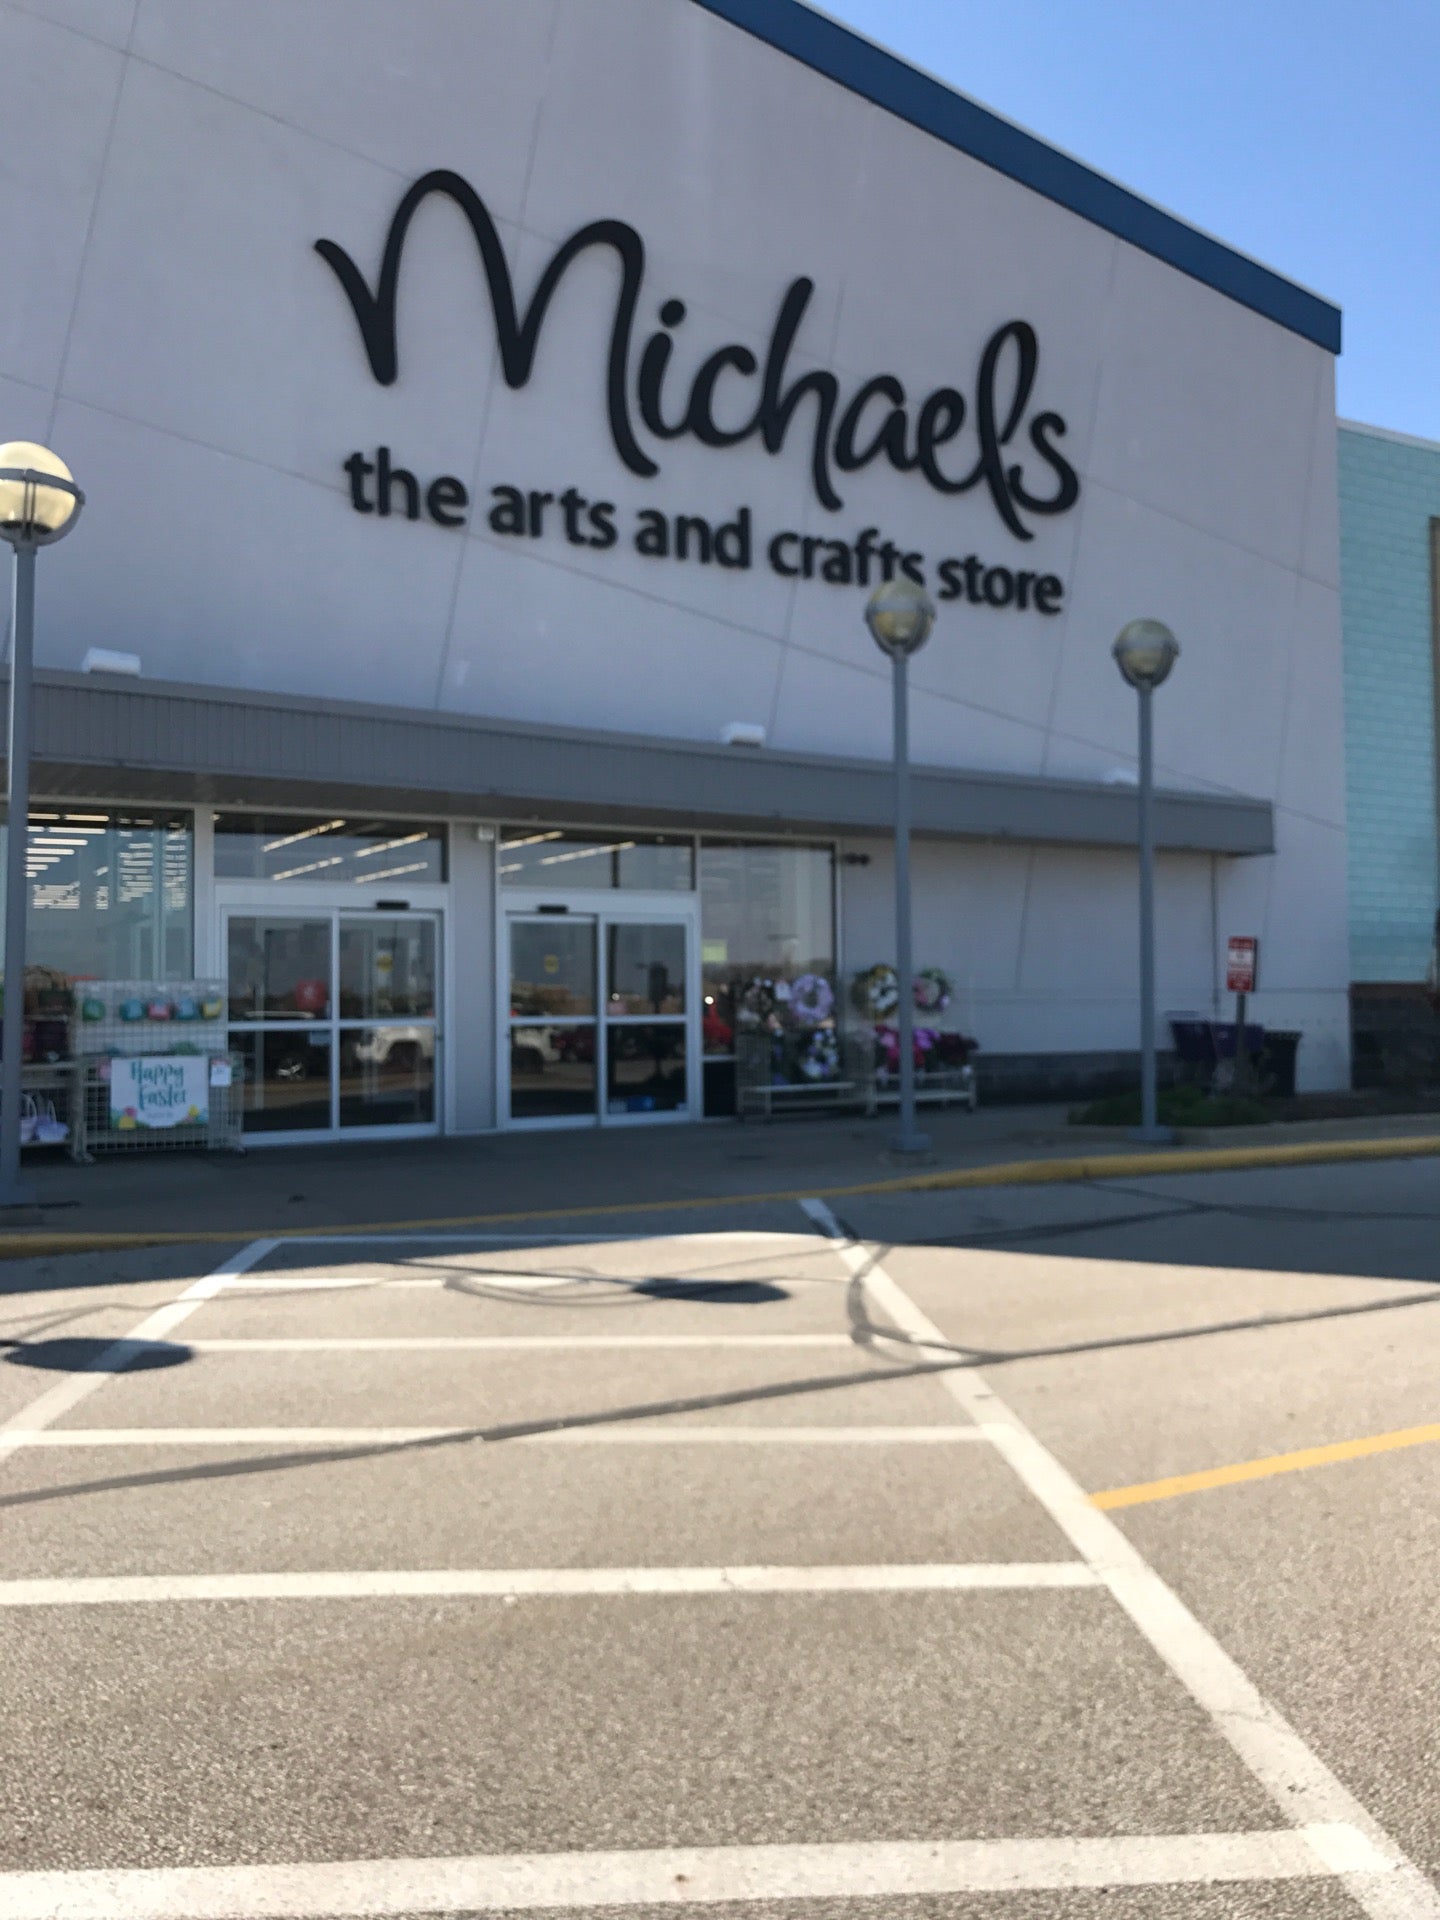 Michaels arts and crafts store tour 